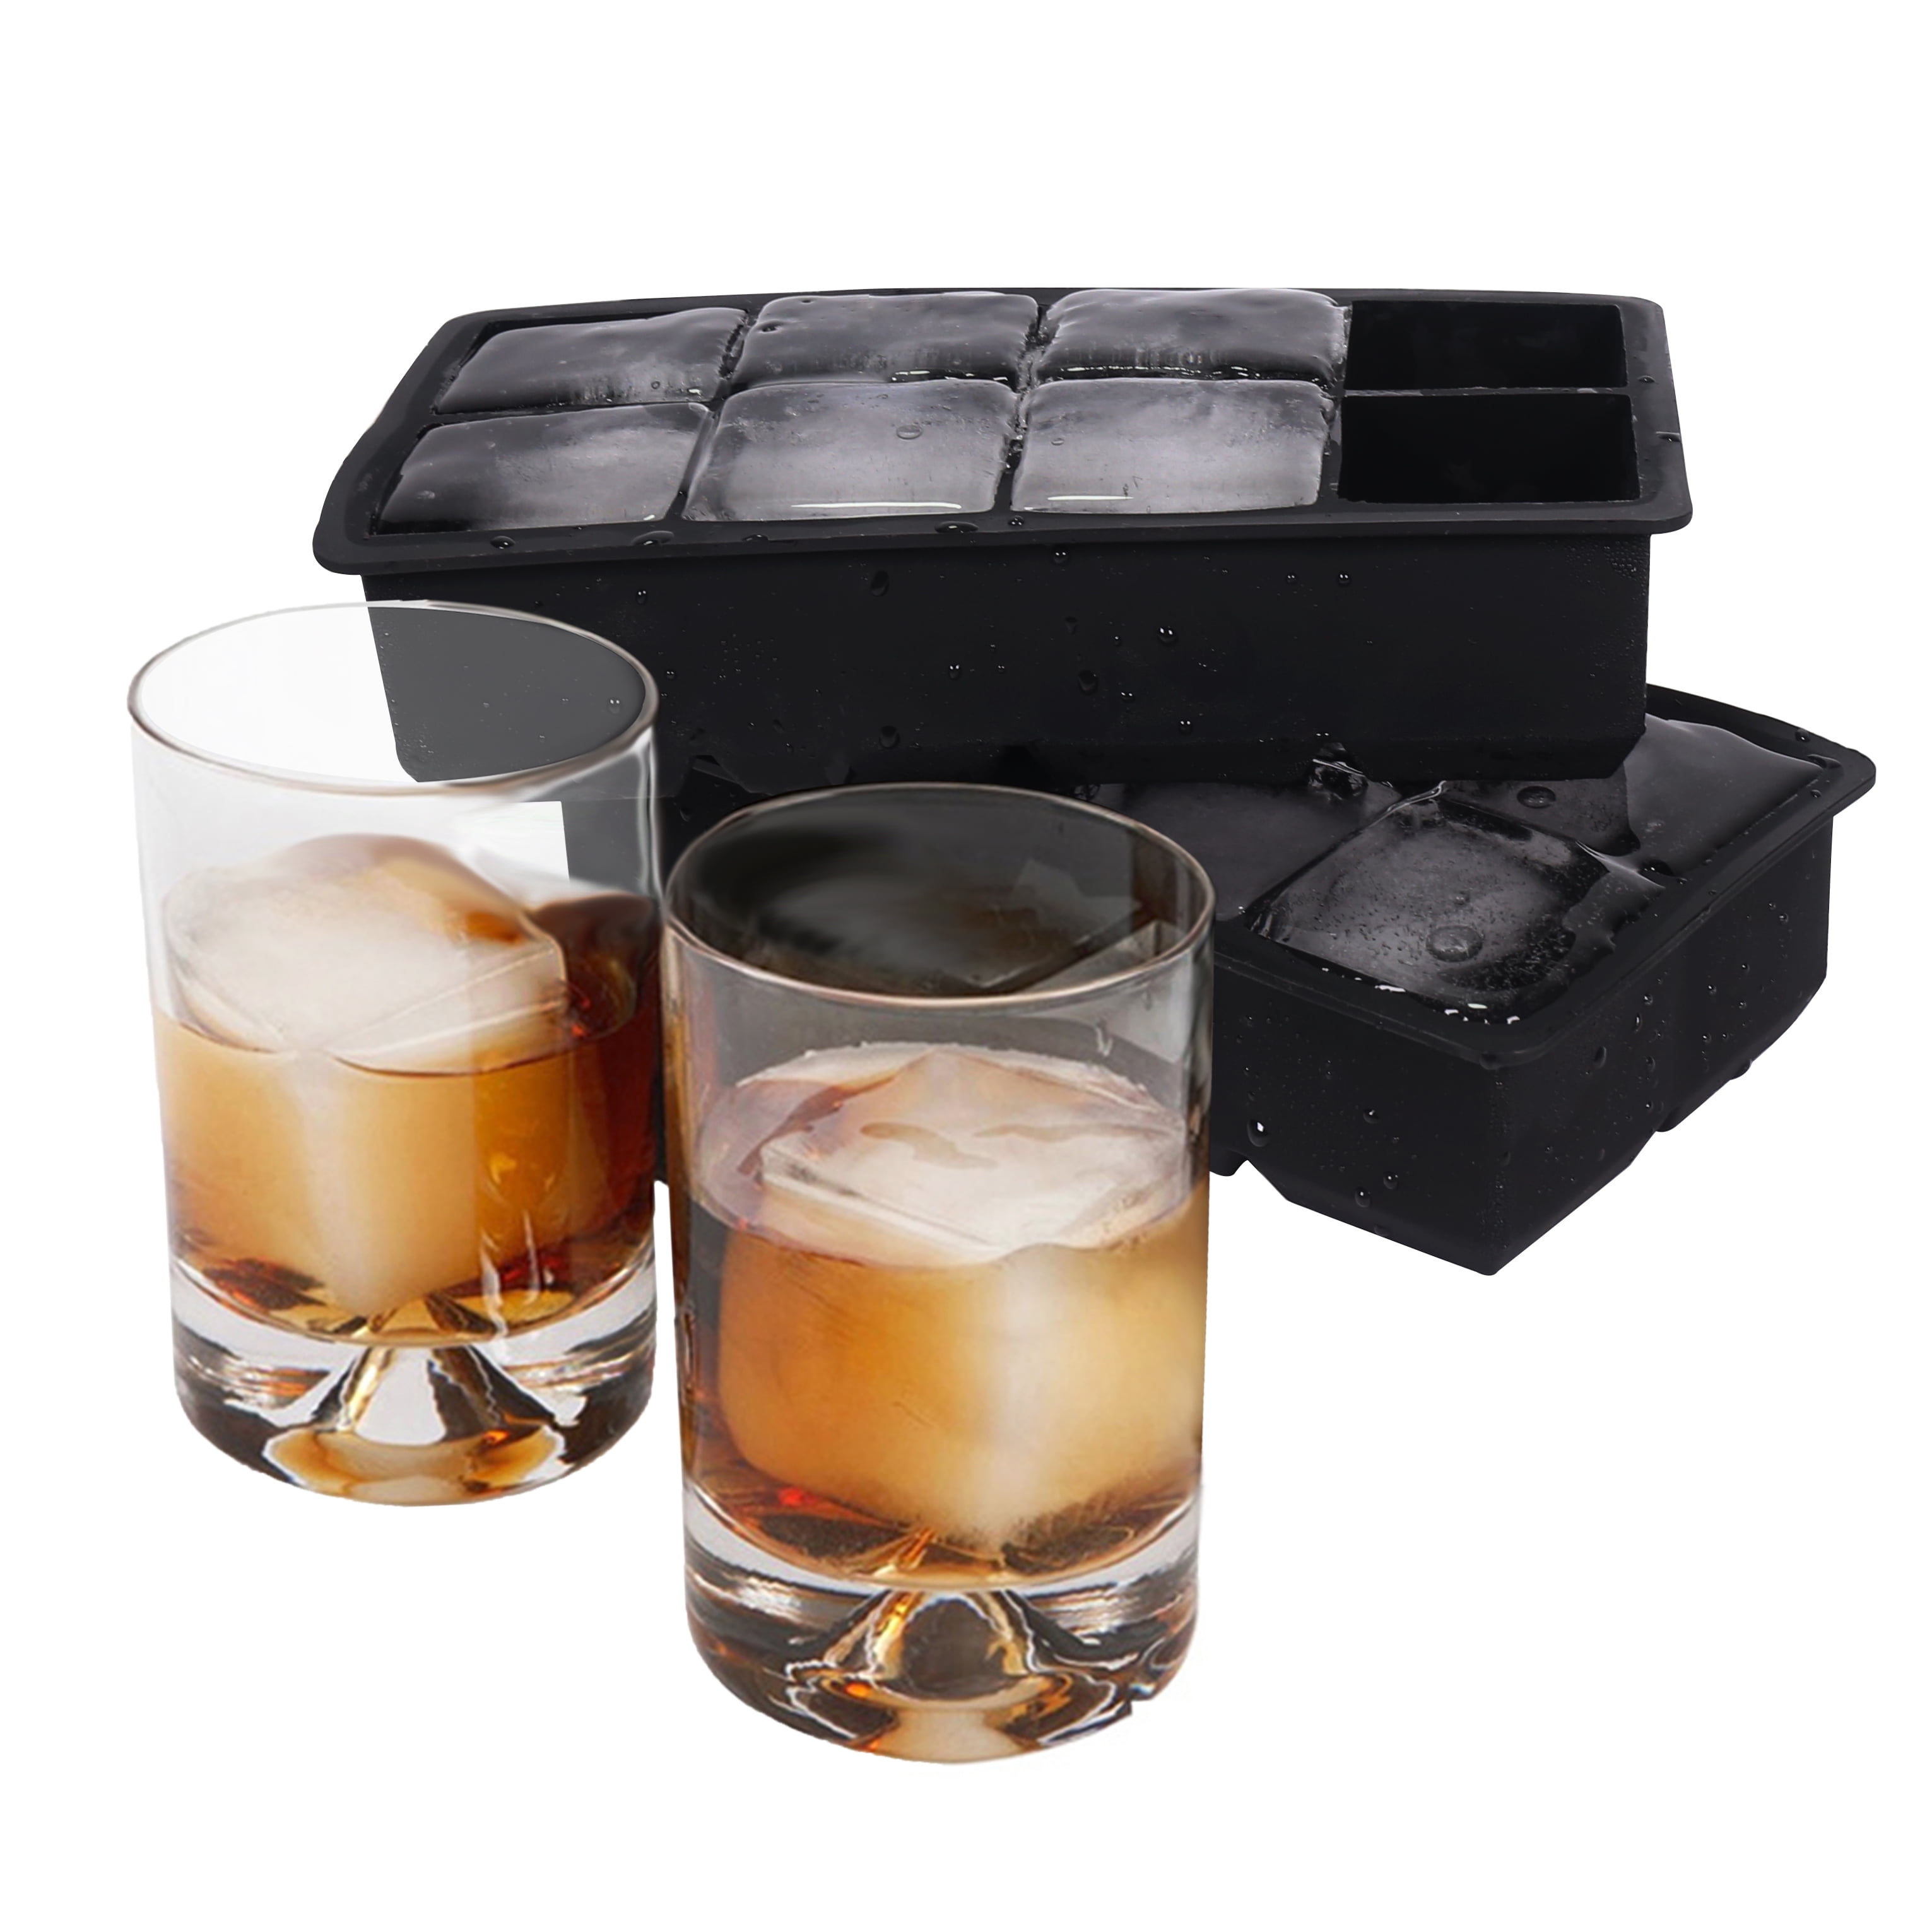 ITWIST Large Ice Cube Tray, 2''Whiskey Ice Mold with Bin & Tong, Square Ice  Cube Mold Making 10Pcs Ice Cubes for Cocktails Whiskey Bourbon Scotch-Easy